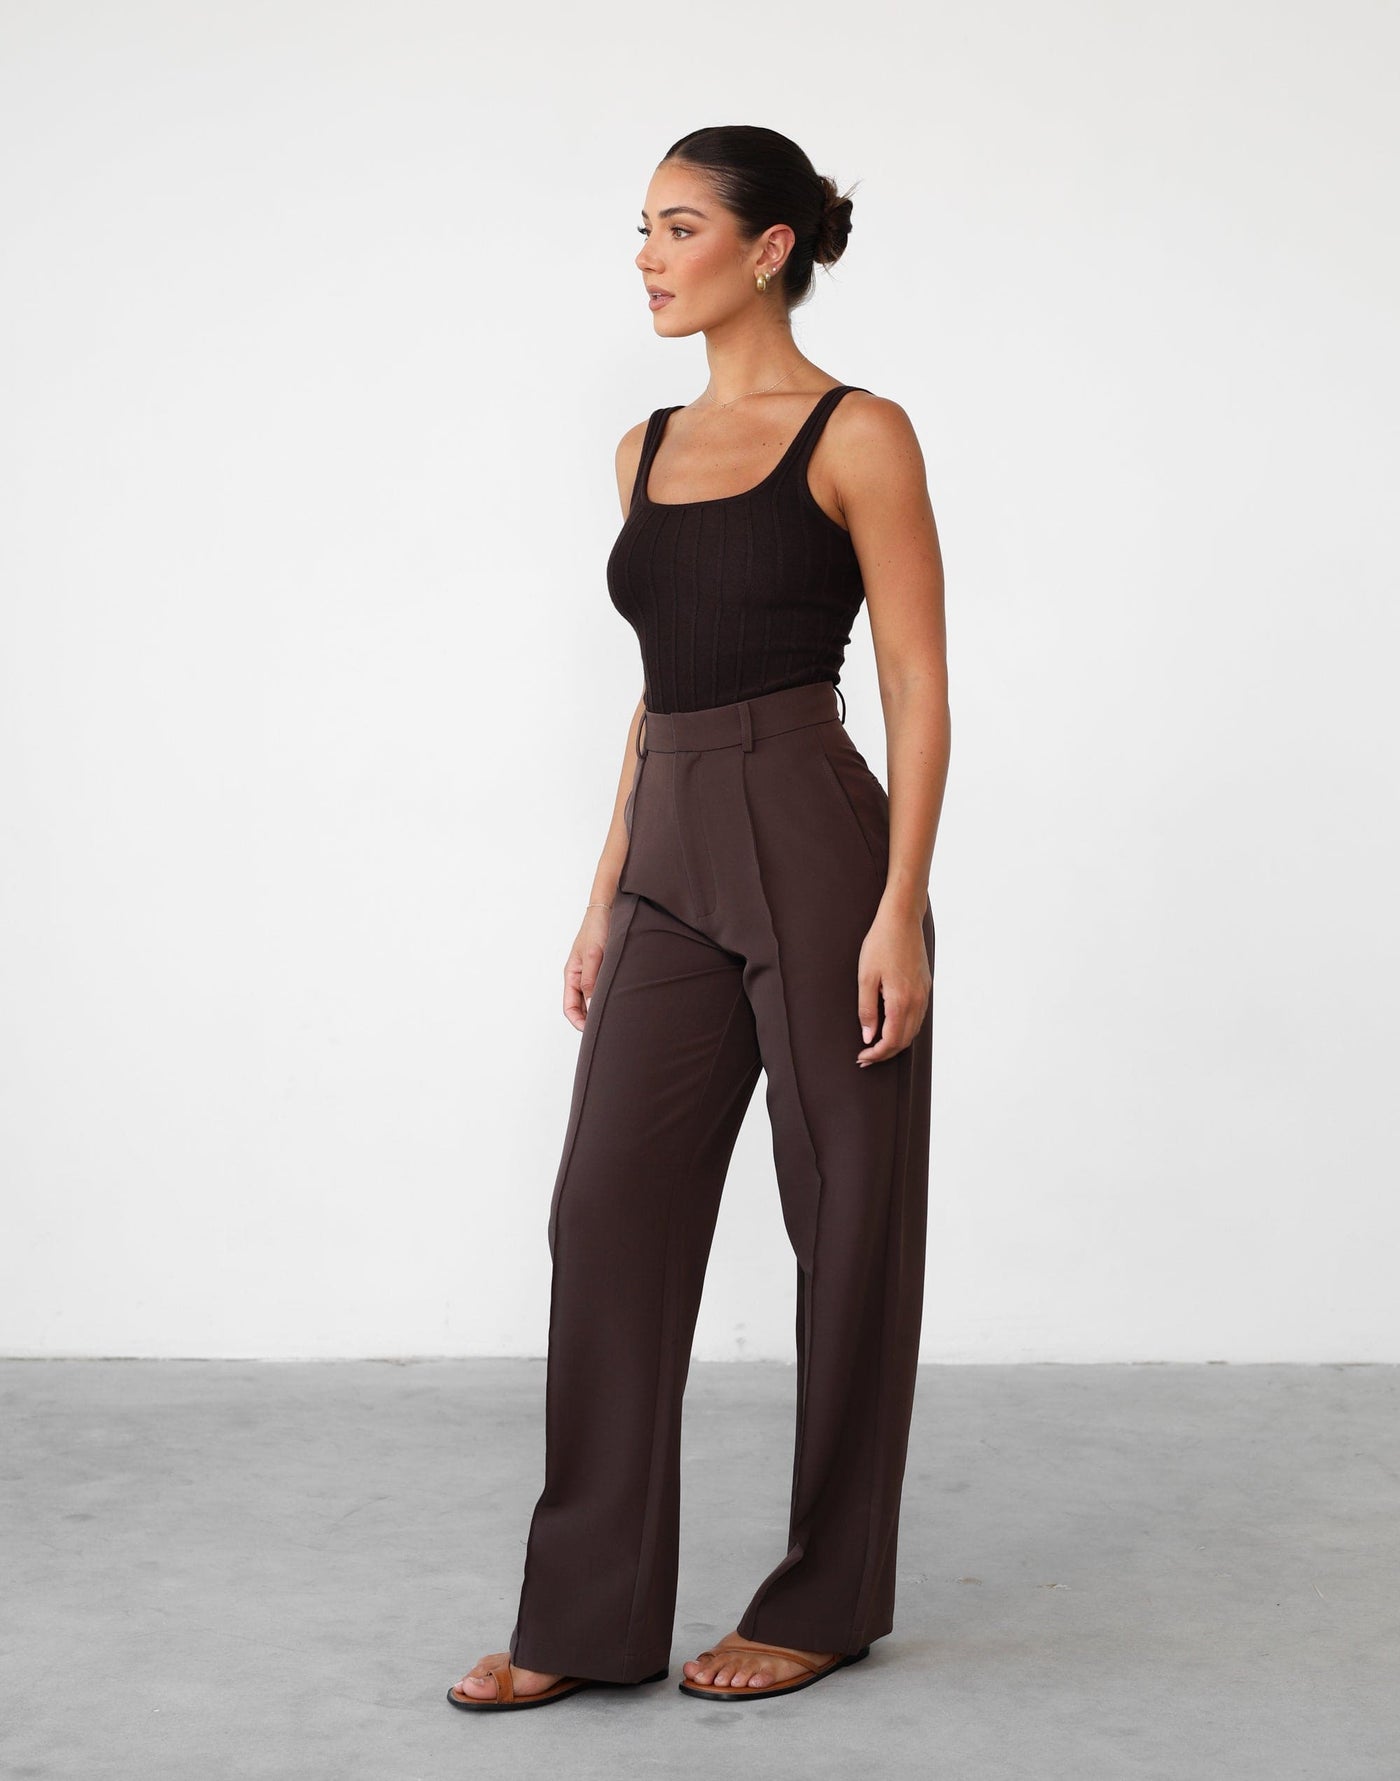 Ephemeral Top (Chocolate) - Scoop Neck Ribbed Knit Top - Women's Top - Charcoal Clothing